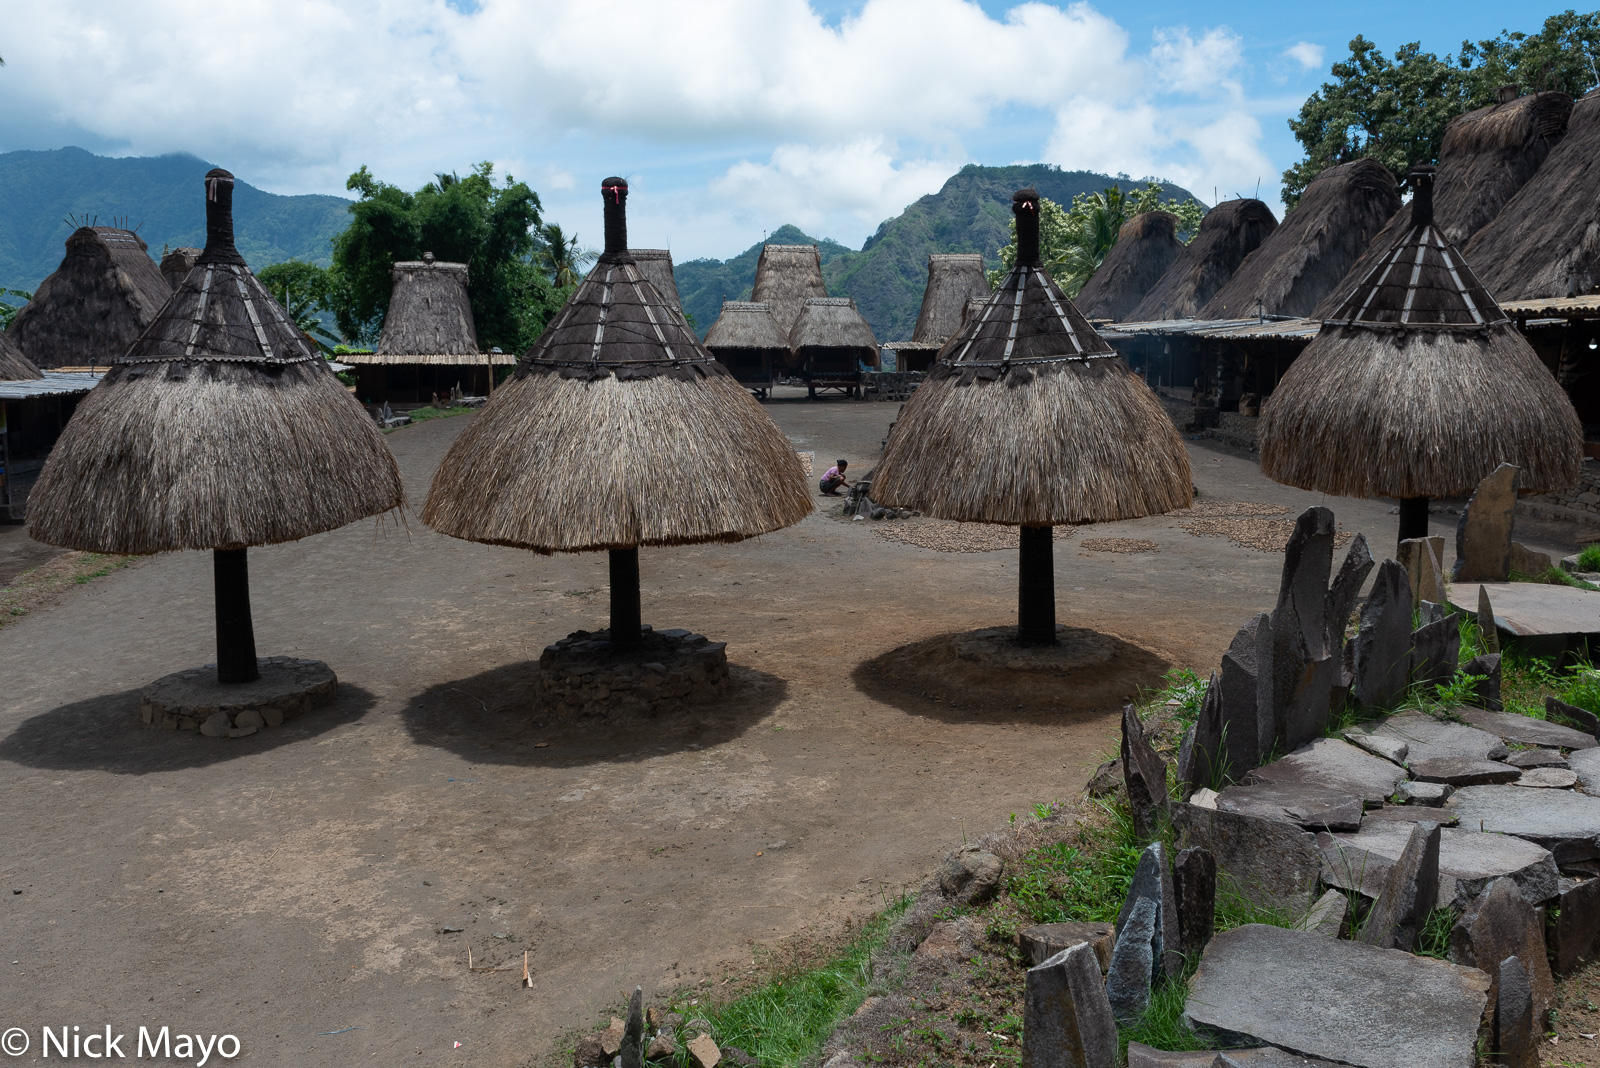 Clan bhaga and ngadhu and a watu lewa (stone altar) in the thatched roof Ngada Regency village of Tolelela.